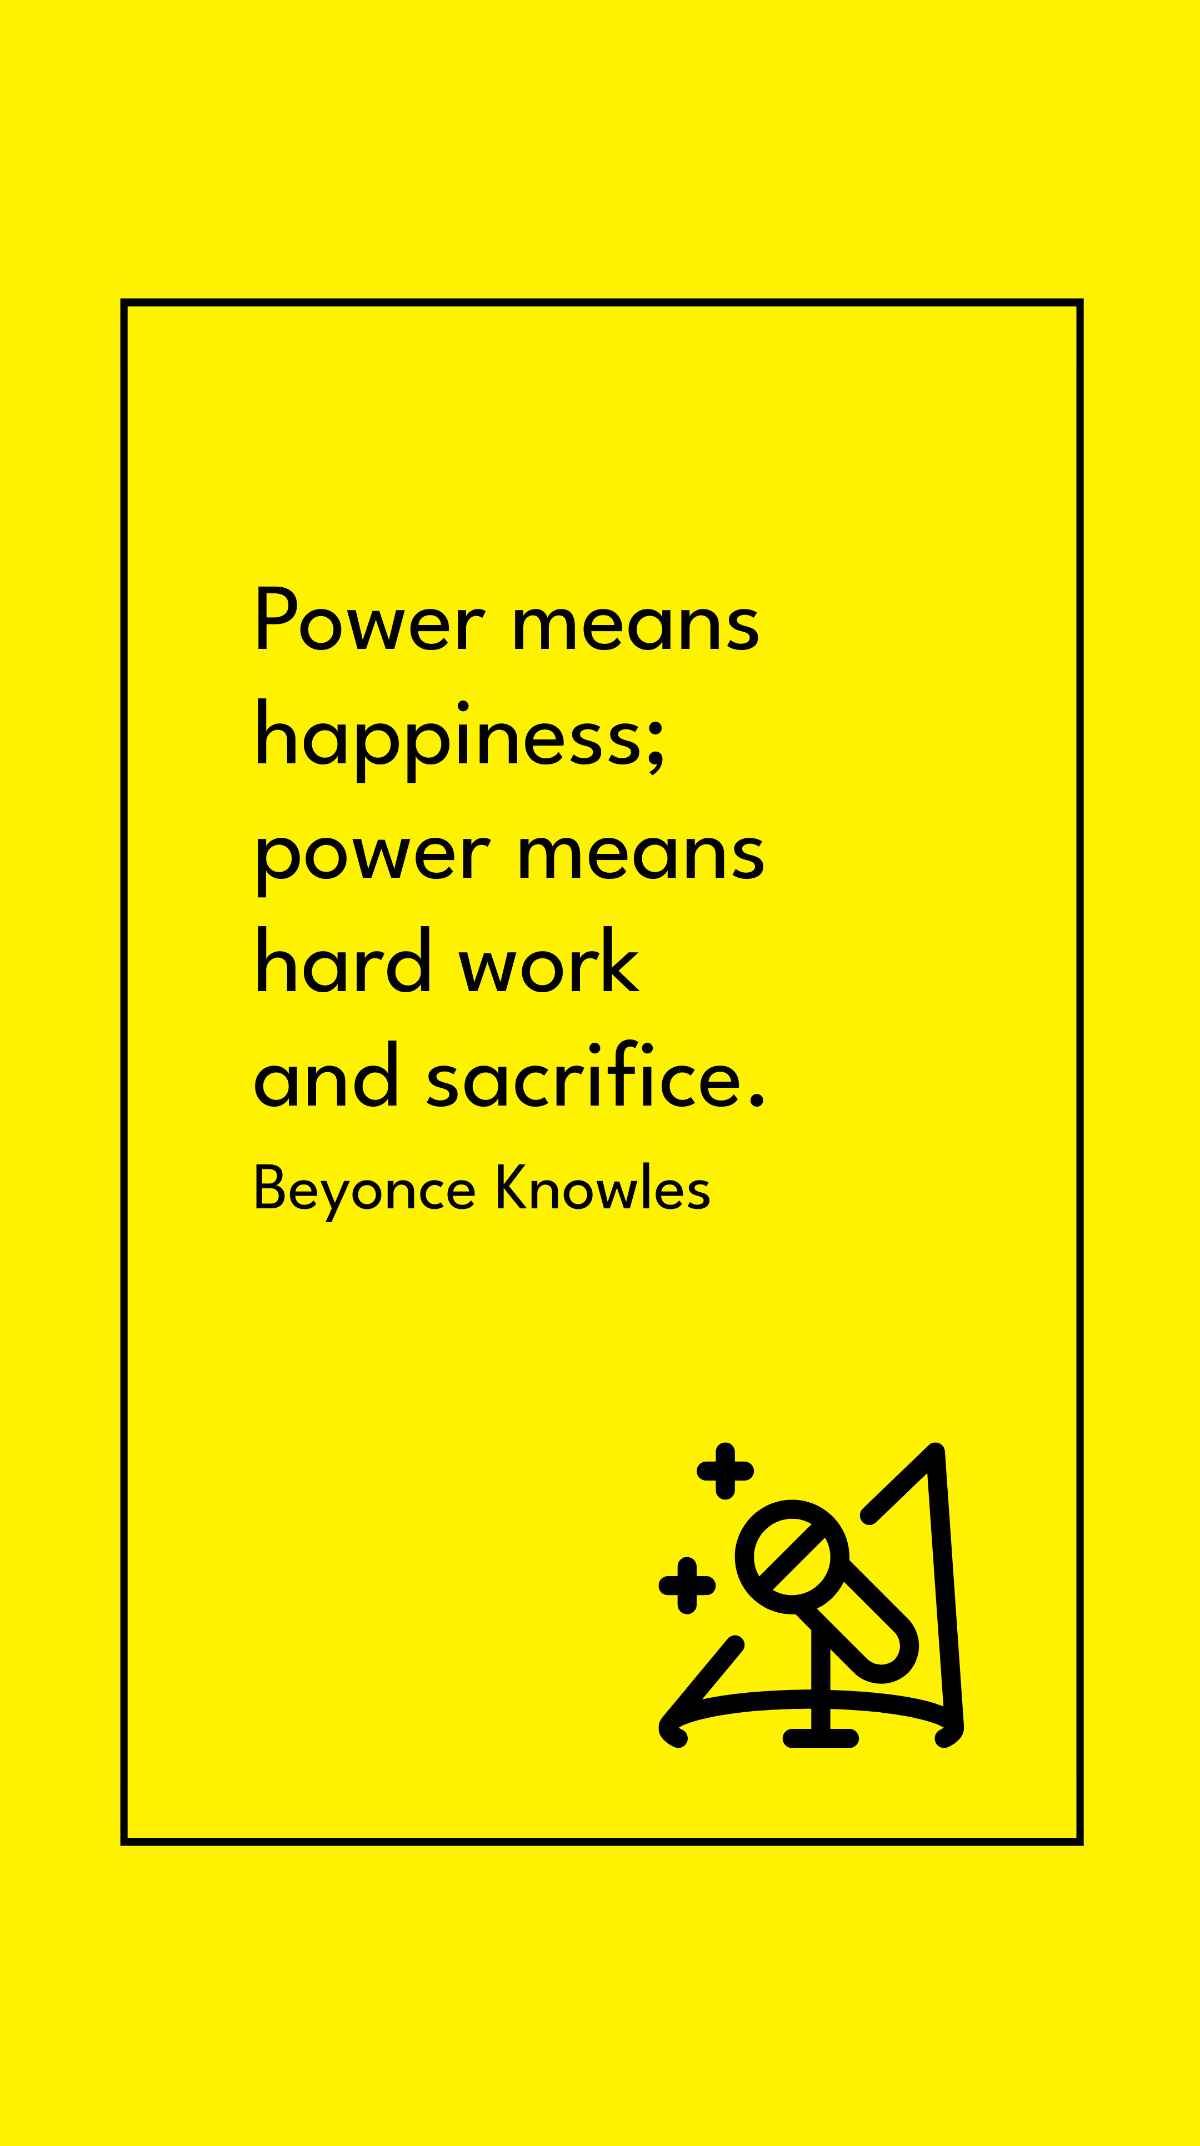 Beyonce Knowles - Power means happiness; power means hard work and sacrifice.